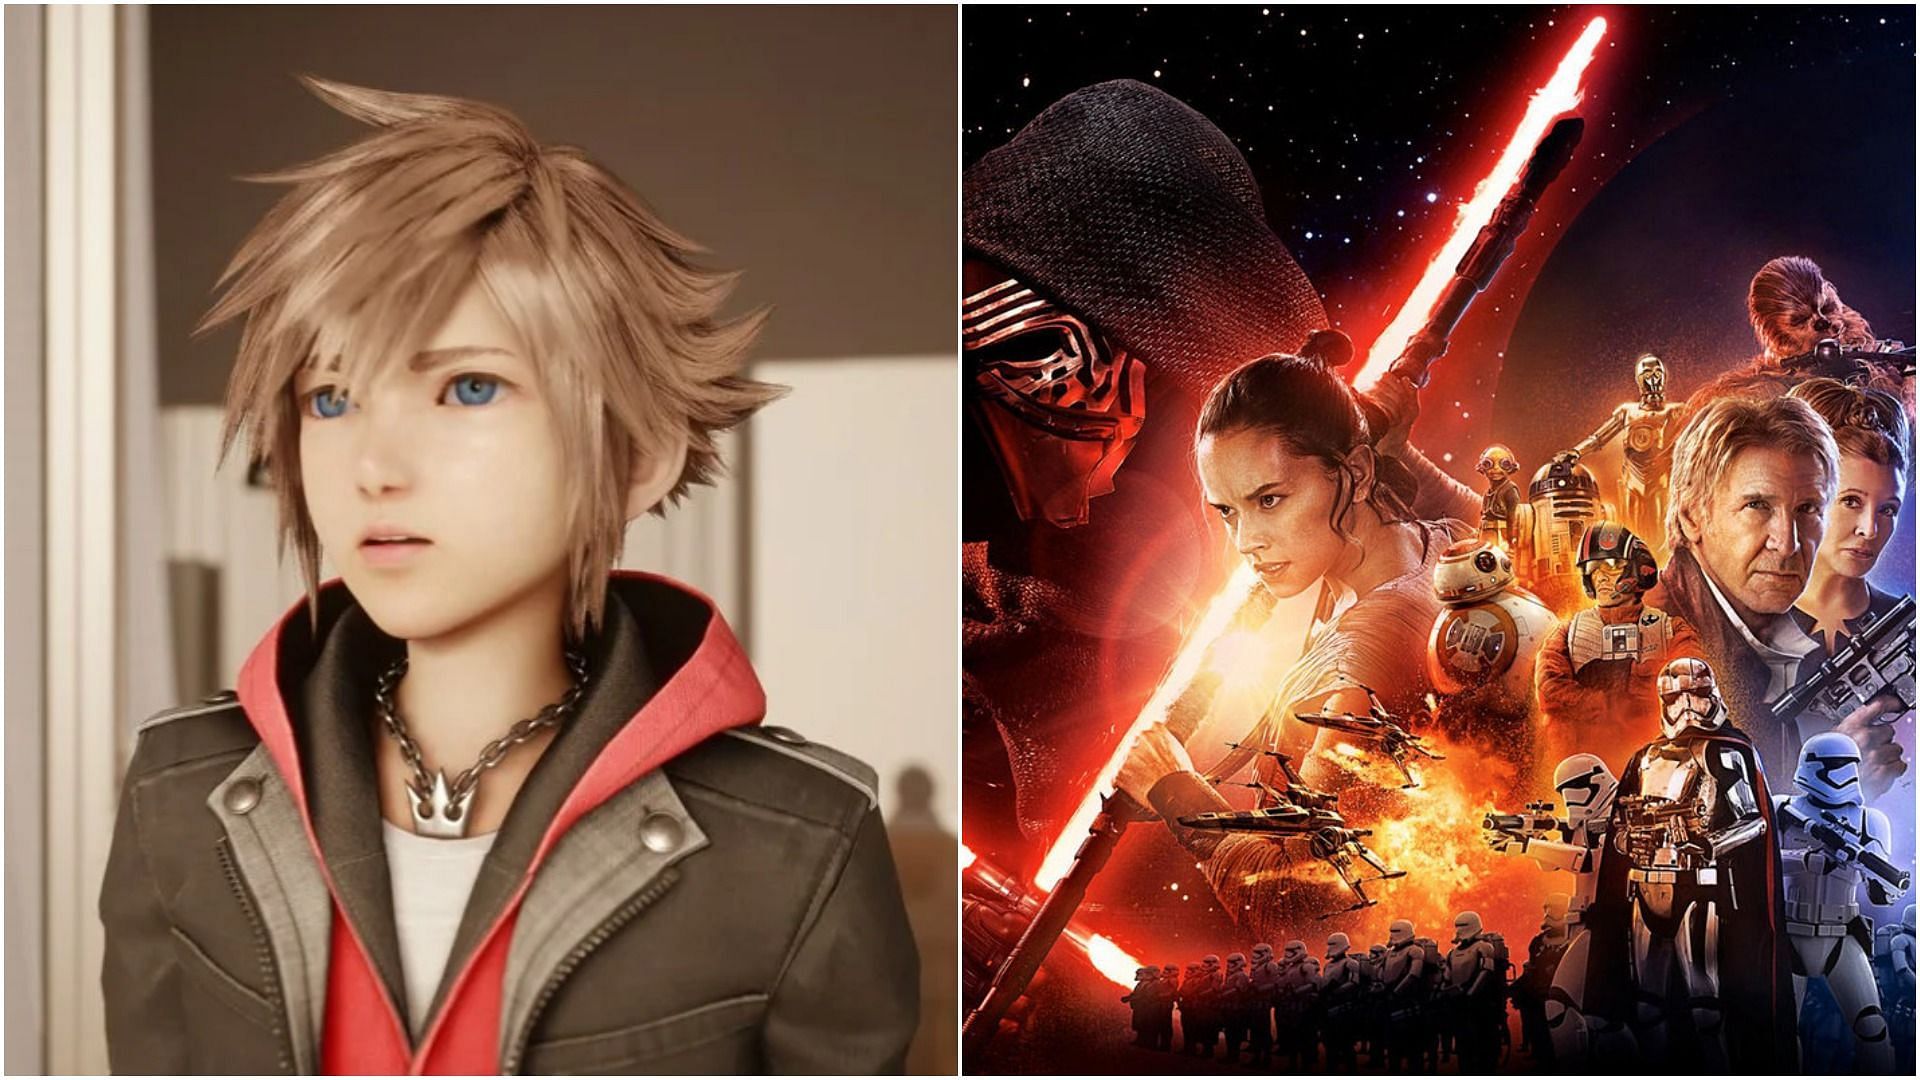 Star Wars could be a fresh crossover in Kingdom Hearts 4 (Images via Square Enix, Disney)